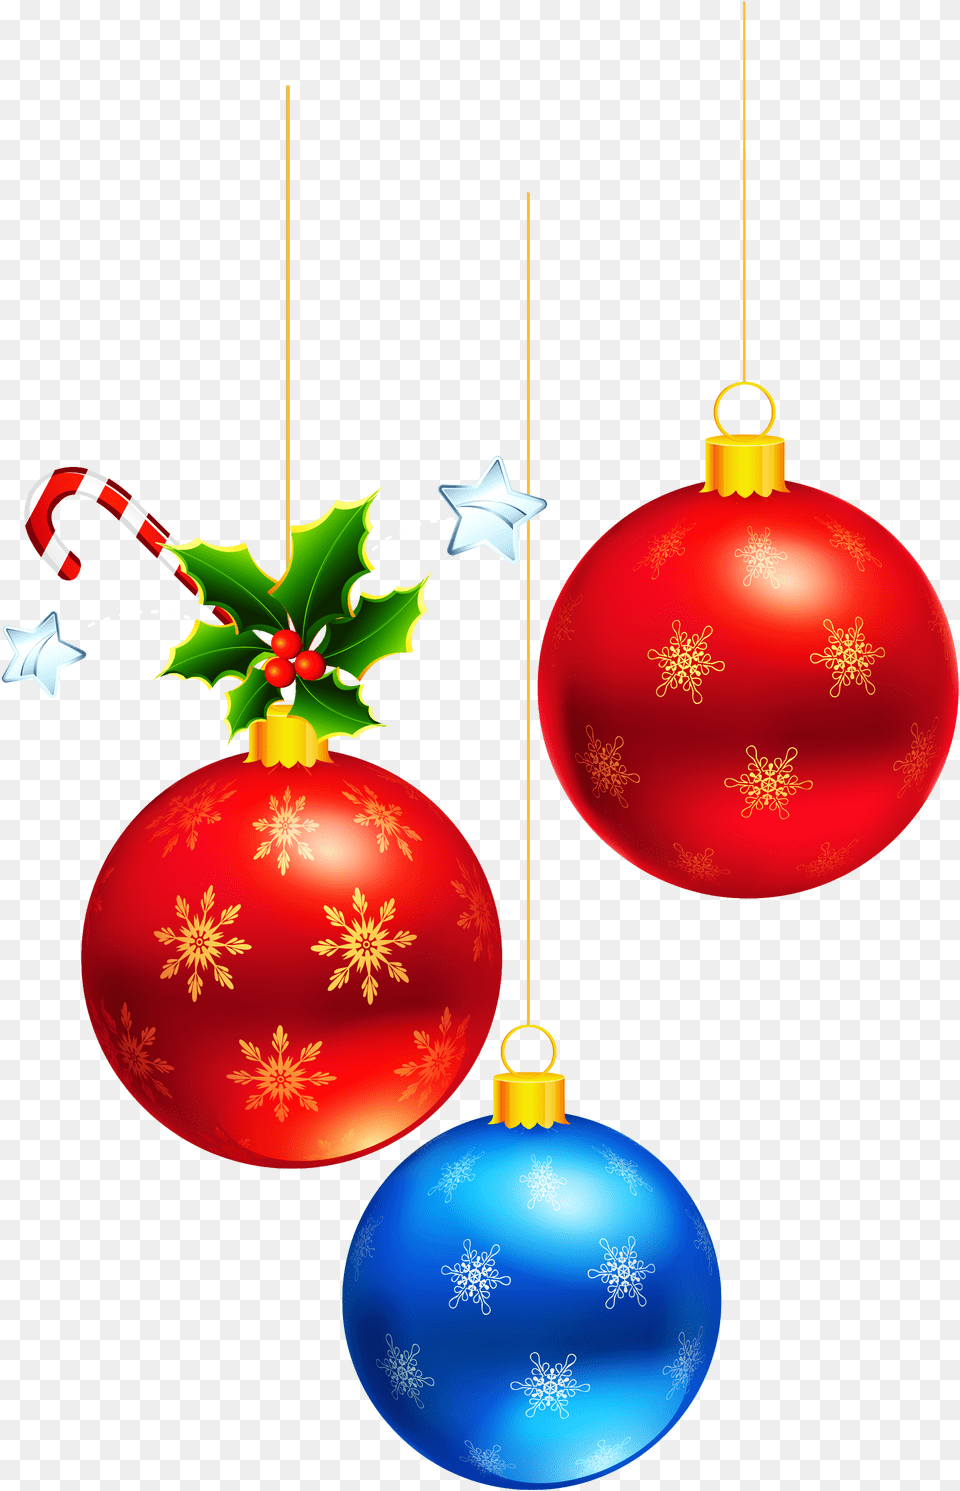 Deco Ornament Tree Decoration Ornaments Christmas Ornament Clipart Background, Accessories Png Image